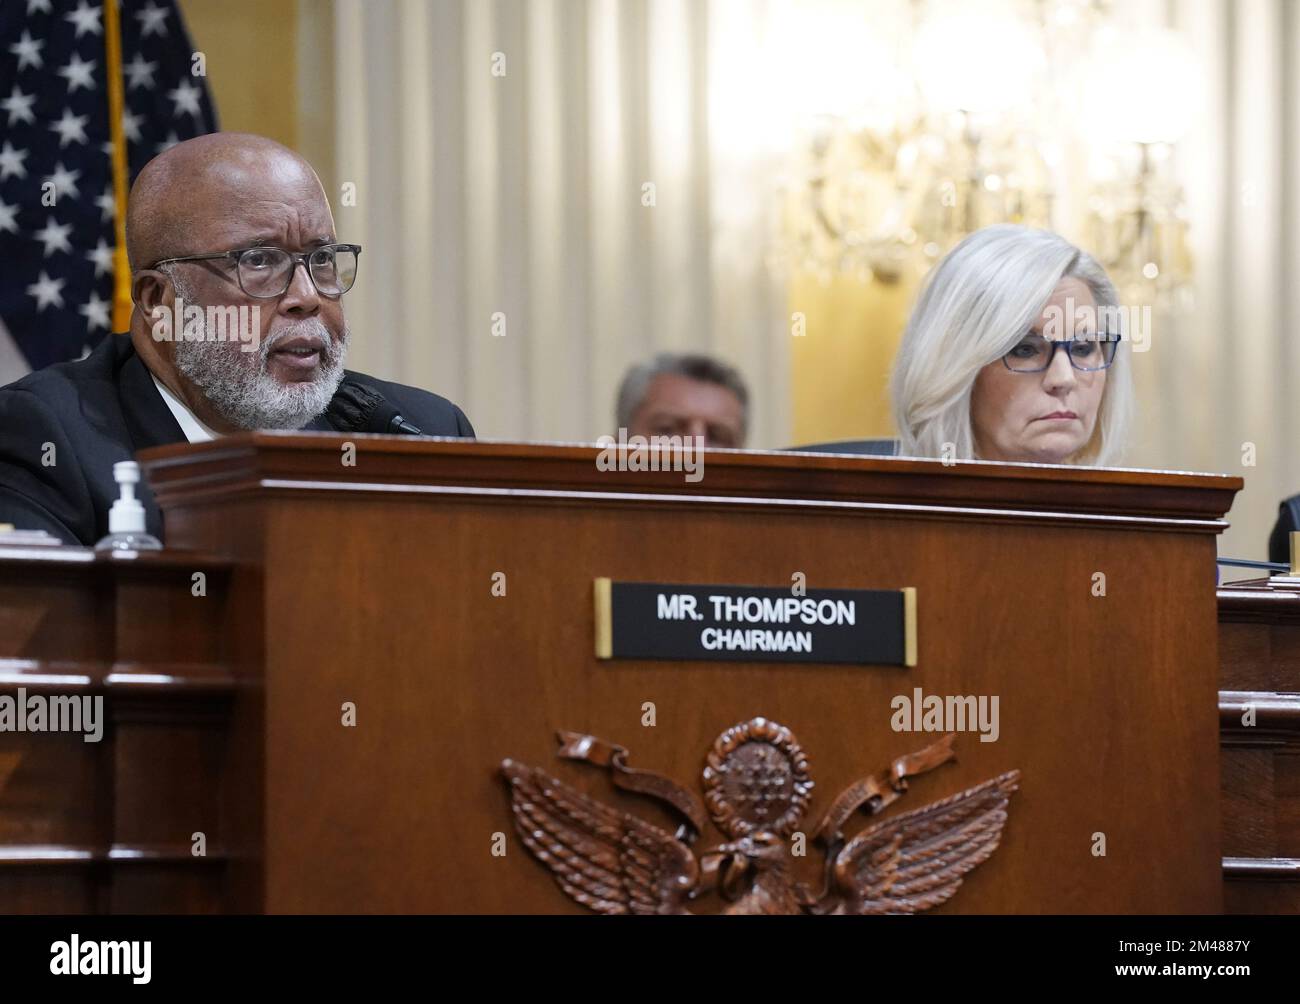 Washington, United States. 19th Dec, 2022. Committee Chairman Bennie Thompson, D-MS, makes an opening statement as Vice Chair Liz Cheney, R-WY, (R) listens as the House Select Committee investigating the Jan. 6 attack on the U.S. Capitol holds its final public hearing to discuss the findings of an 18-month investigation, on Capitol Hill in Washington, DC on Monday, December 19, 2022. Photo by Ken Cedeno/UPI Credit: UPI/Alamy Live News Stock Photo